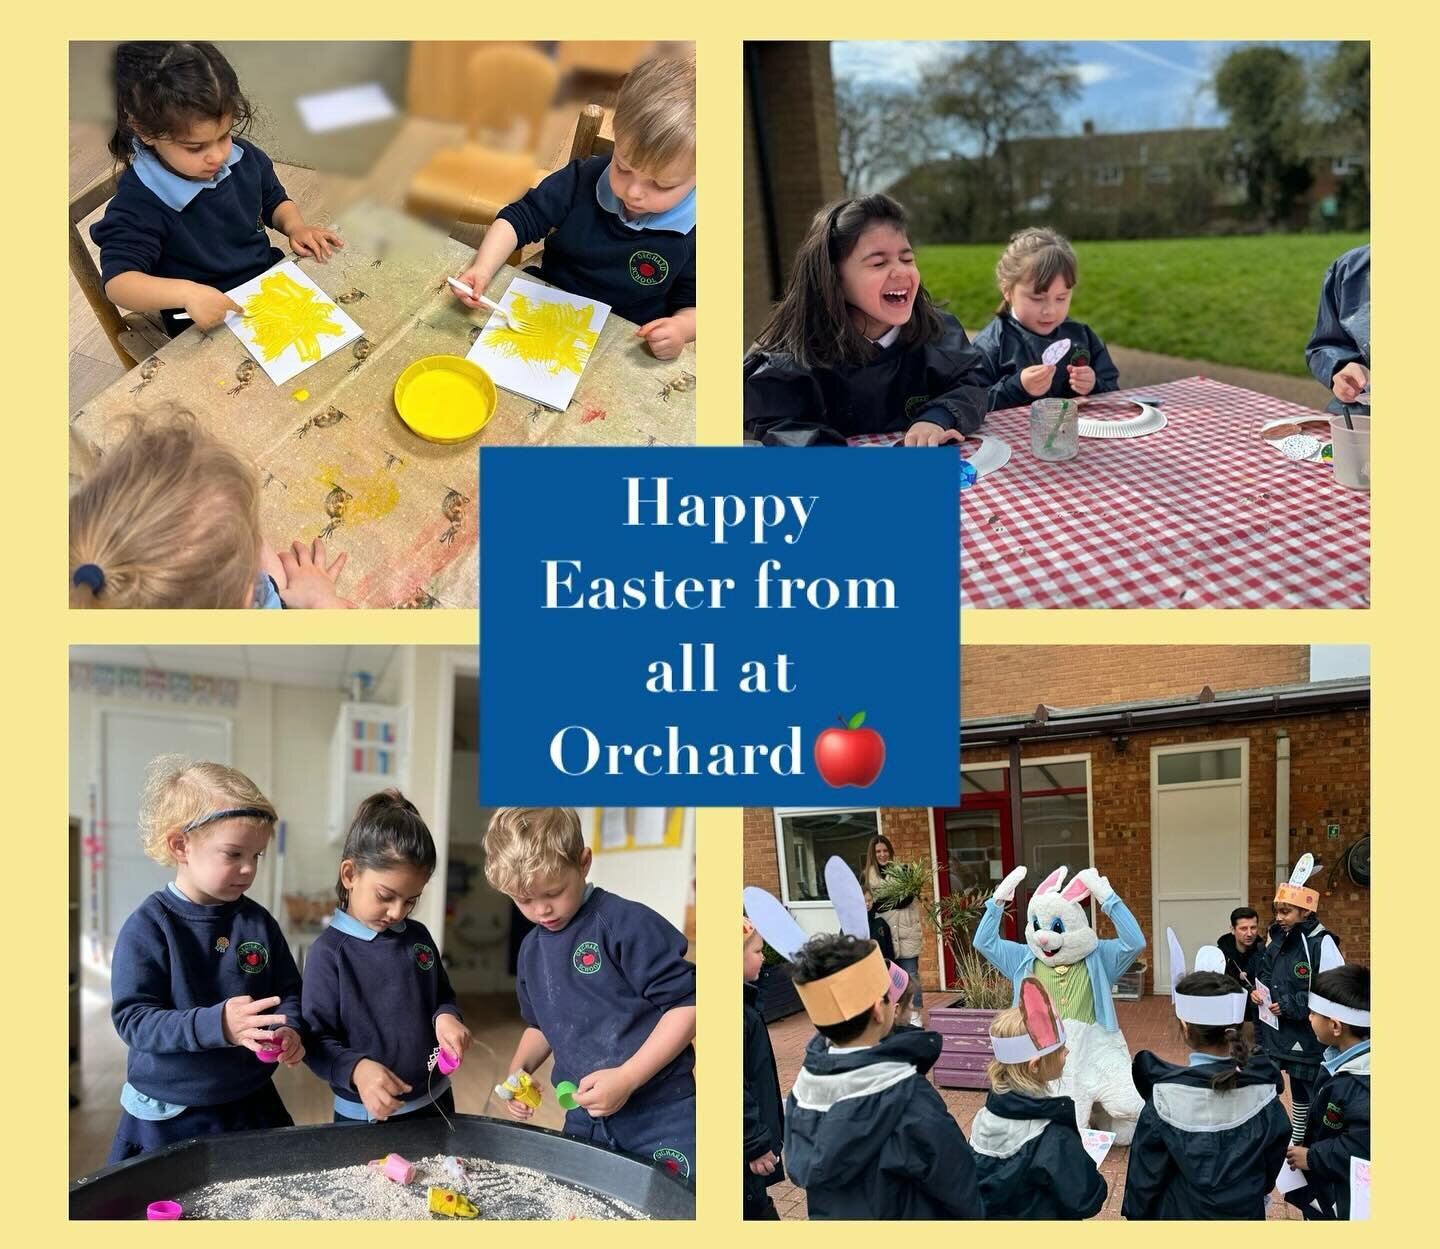 Wishing everyone a wonderful Easter from all at Orchard🍎

We look forward to welcoming back our Nursery on Monday the 8th of April and our School on Tuesday the 23rd of April for the start of Summer Term! 

#orchardschoolandnursery #easter